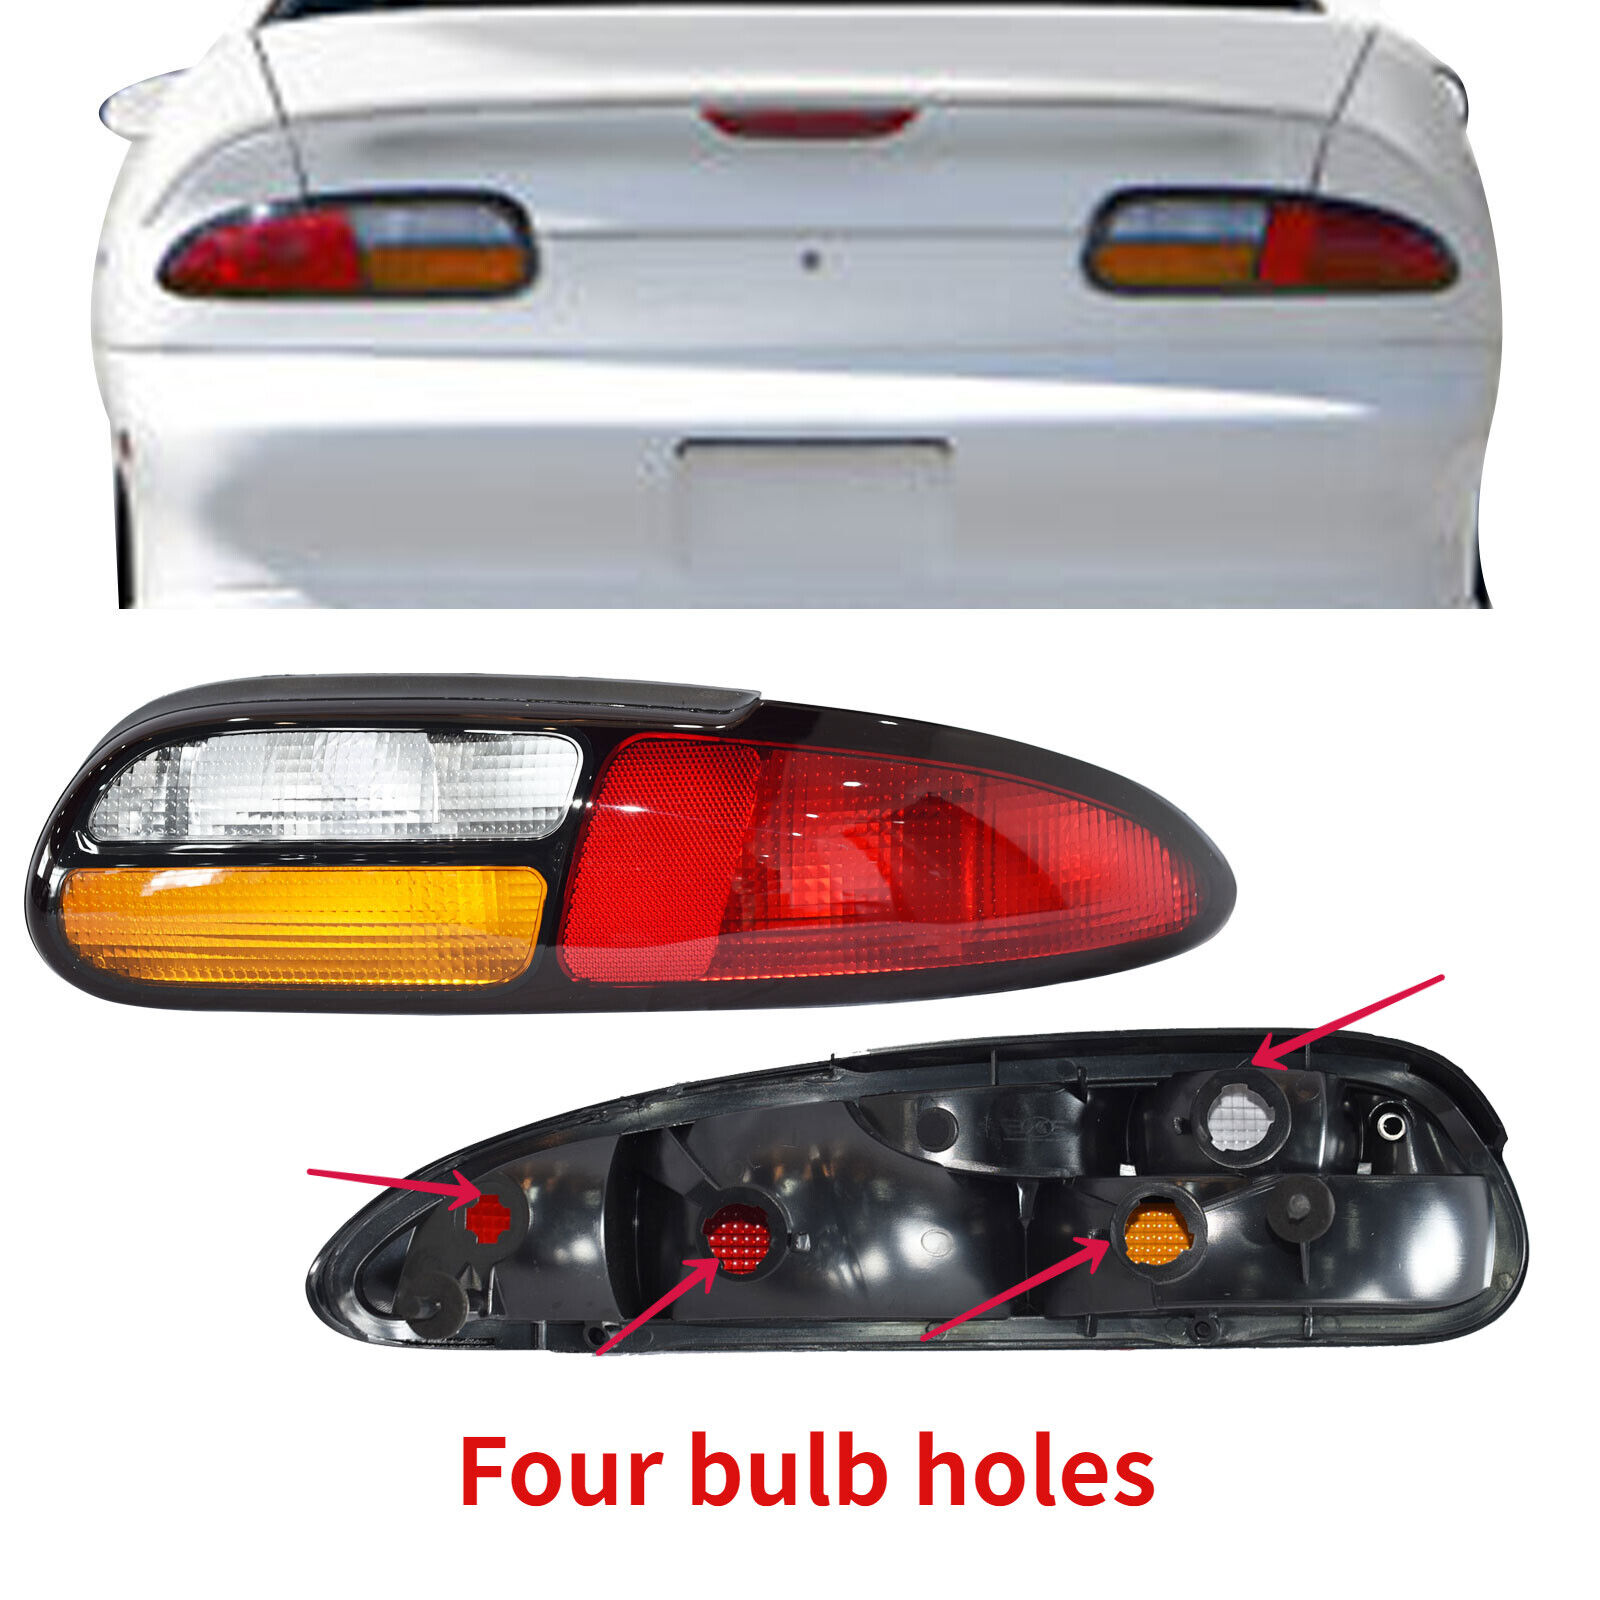 Rear Tail Lights Lamps Pair Four Bulb Holes Set For Chevrolet Camaro 1993-2002 